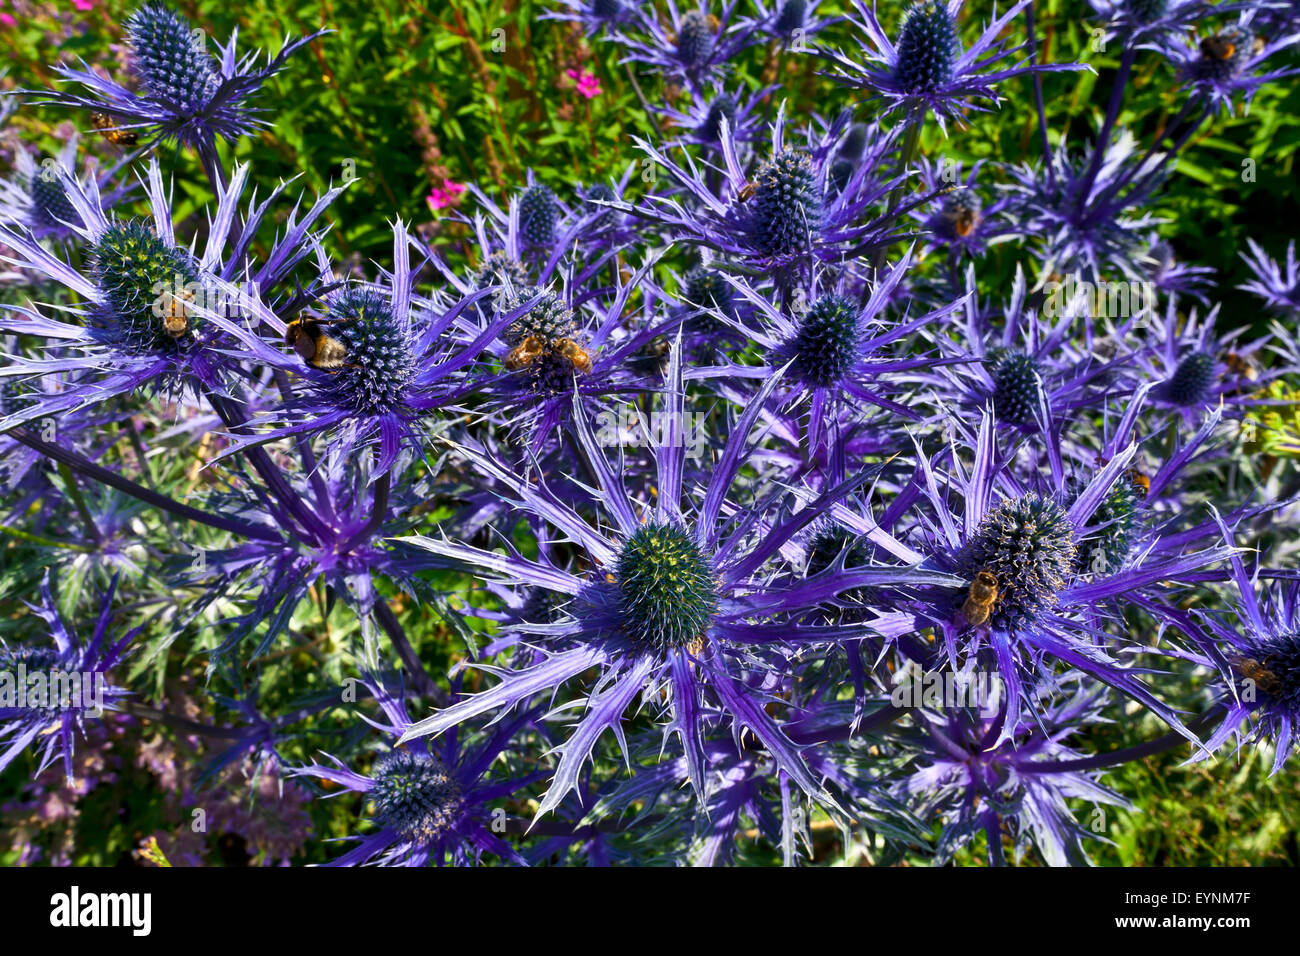 Blue thistle like flower of ERYNGIUM ALPINUM 'BLUE STAR' in a herbaceous border. Stock Photo